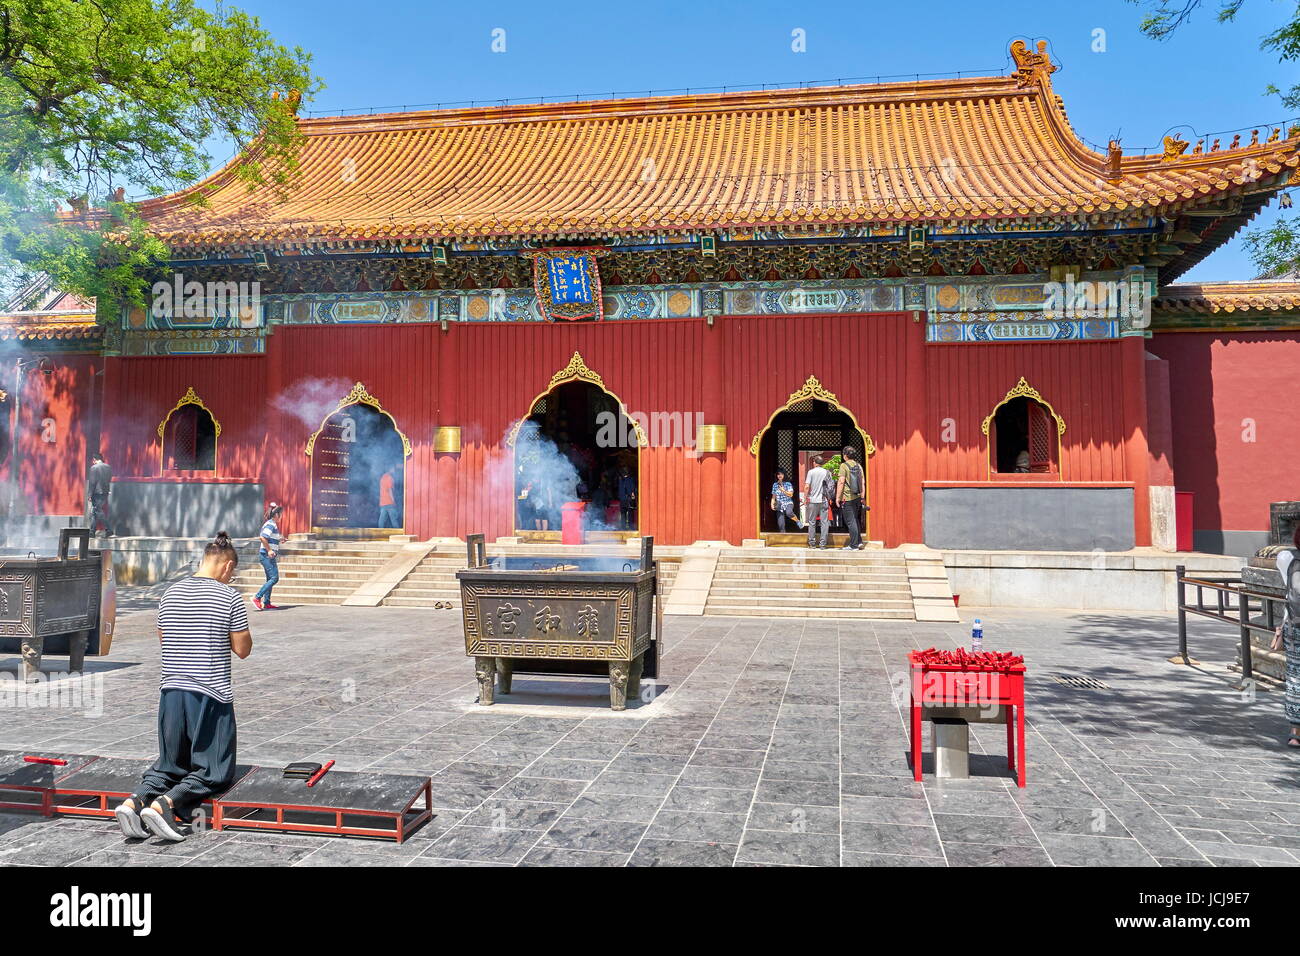 Yonghe Gong, Lama Temple Bouddhiste, Beijing, Chine Banque D'Images